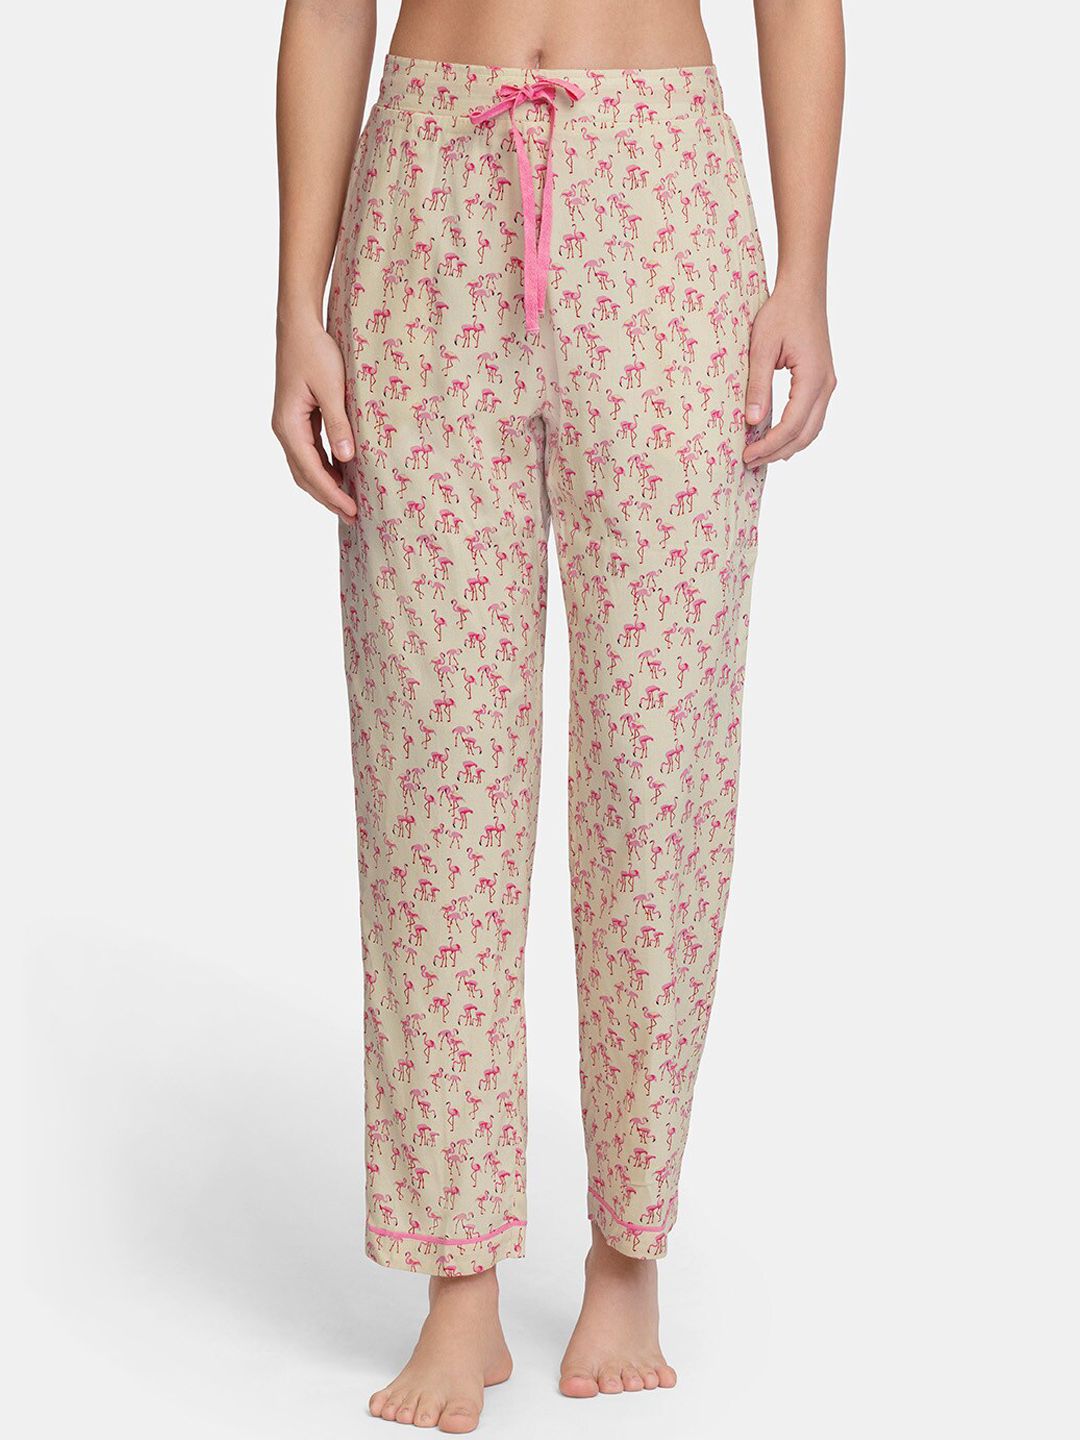 Amante Pink & Beige Printed Lounge Pants Price in India